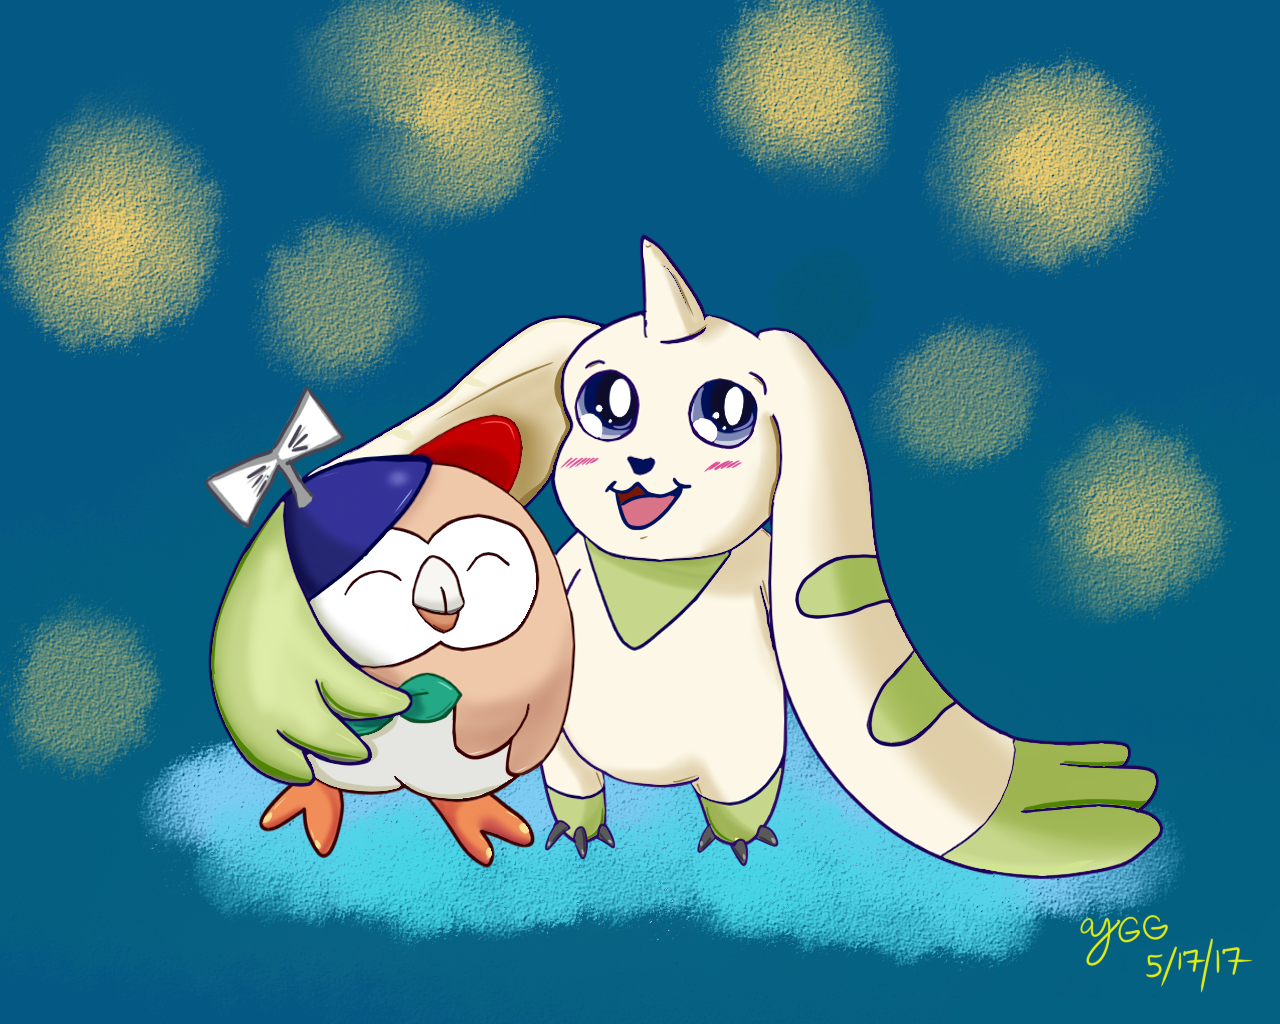 rowlet_and_terriermon_by_yoshigamergirl-db9ij7b.png